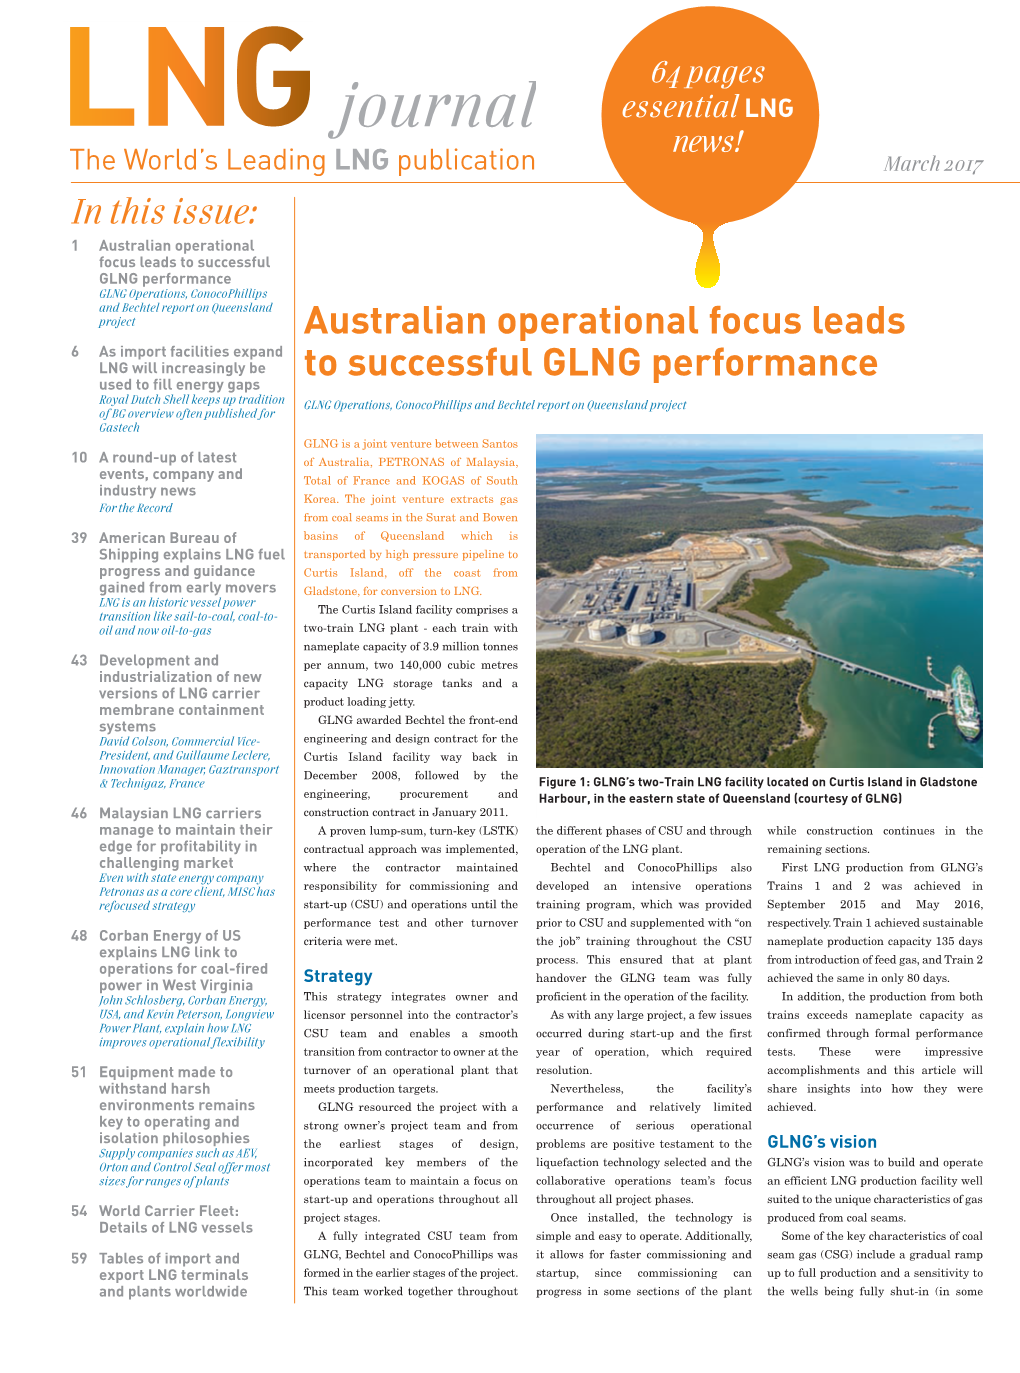 Australian Operational Focus Leads to Successful GLNG Performance